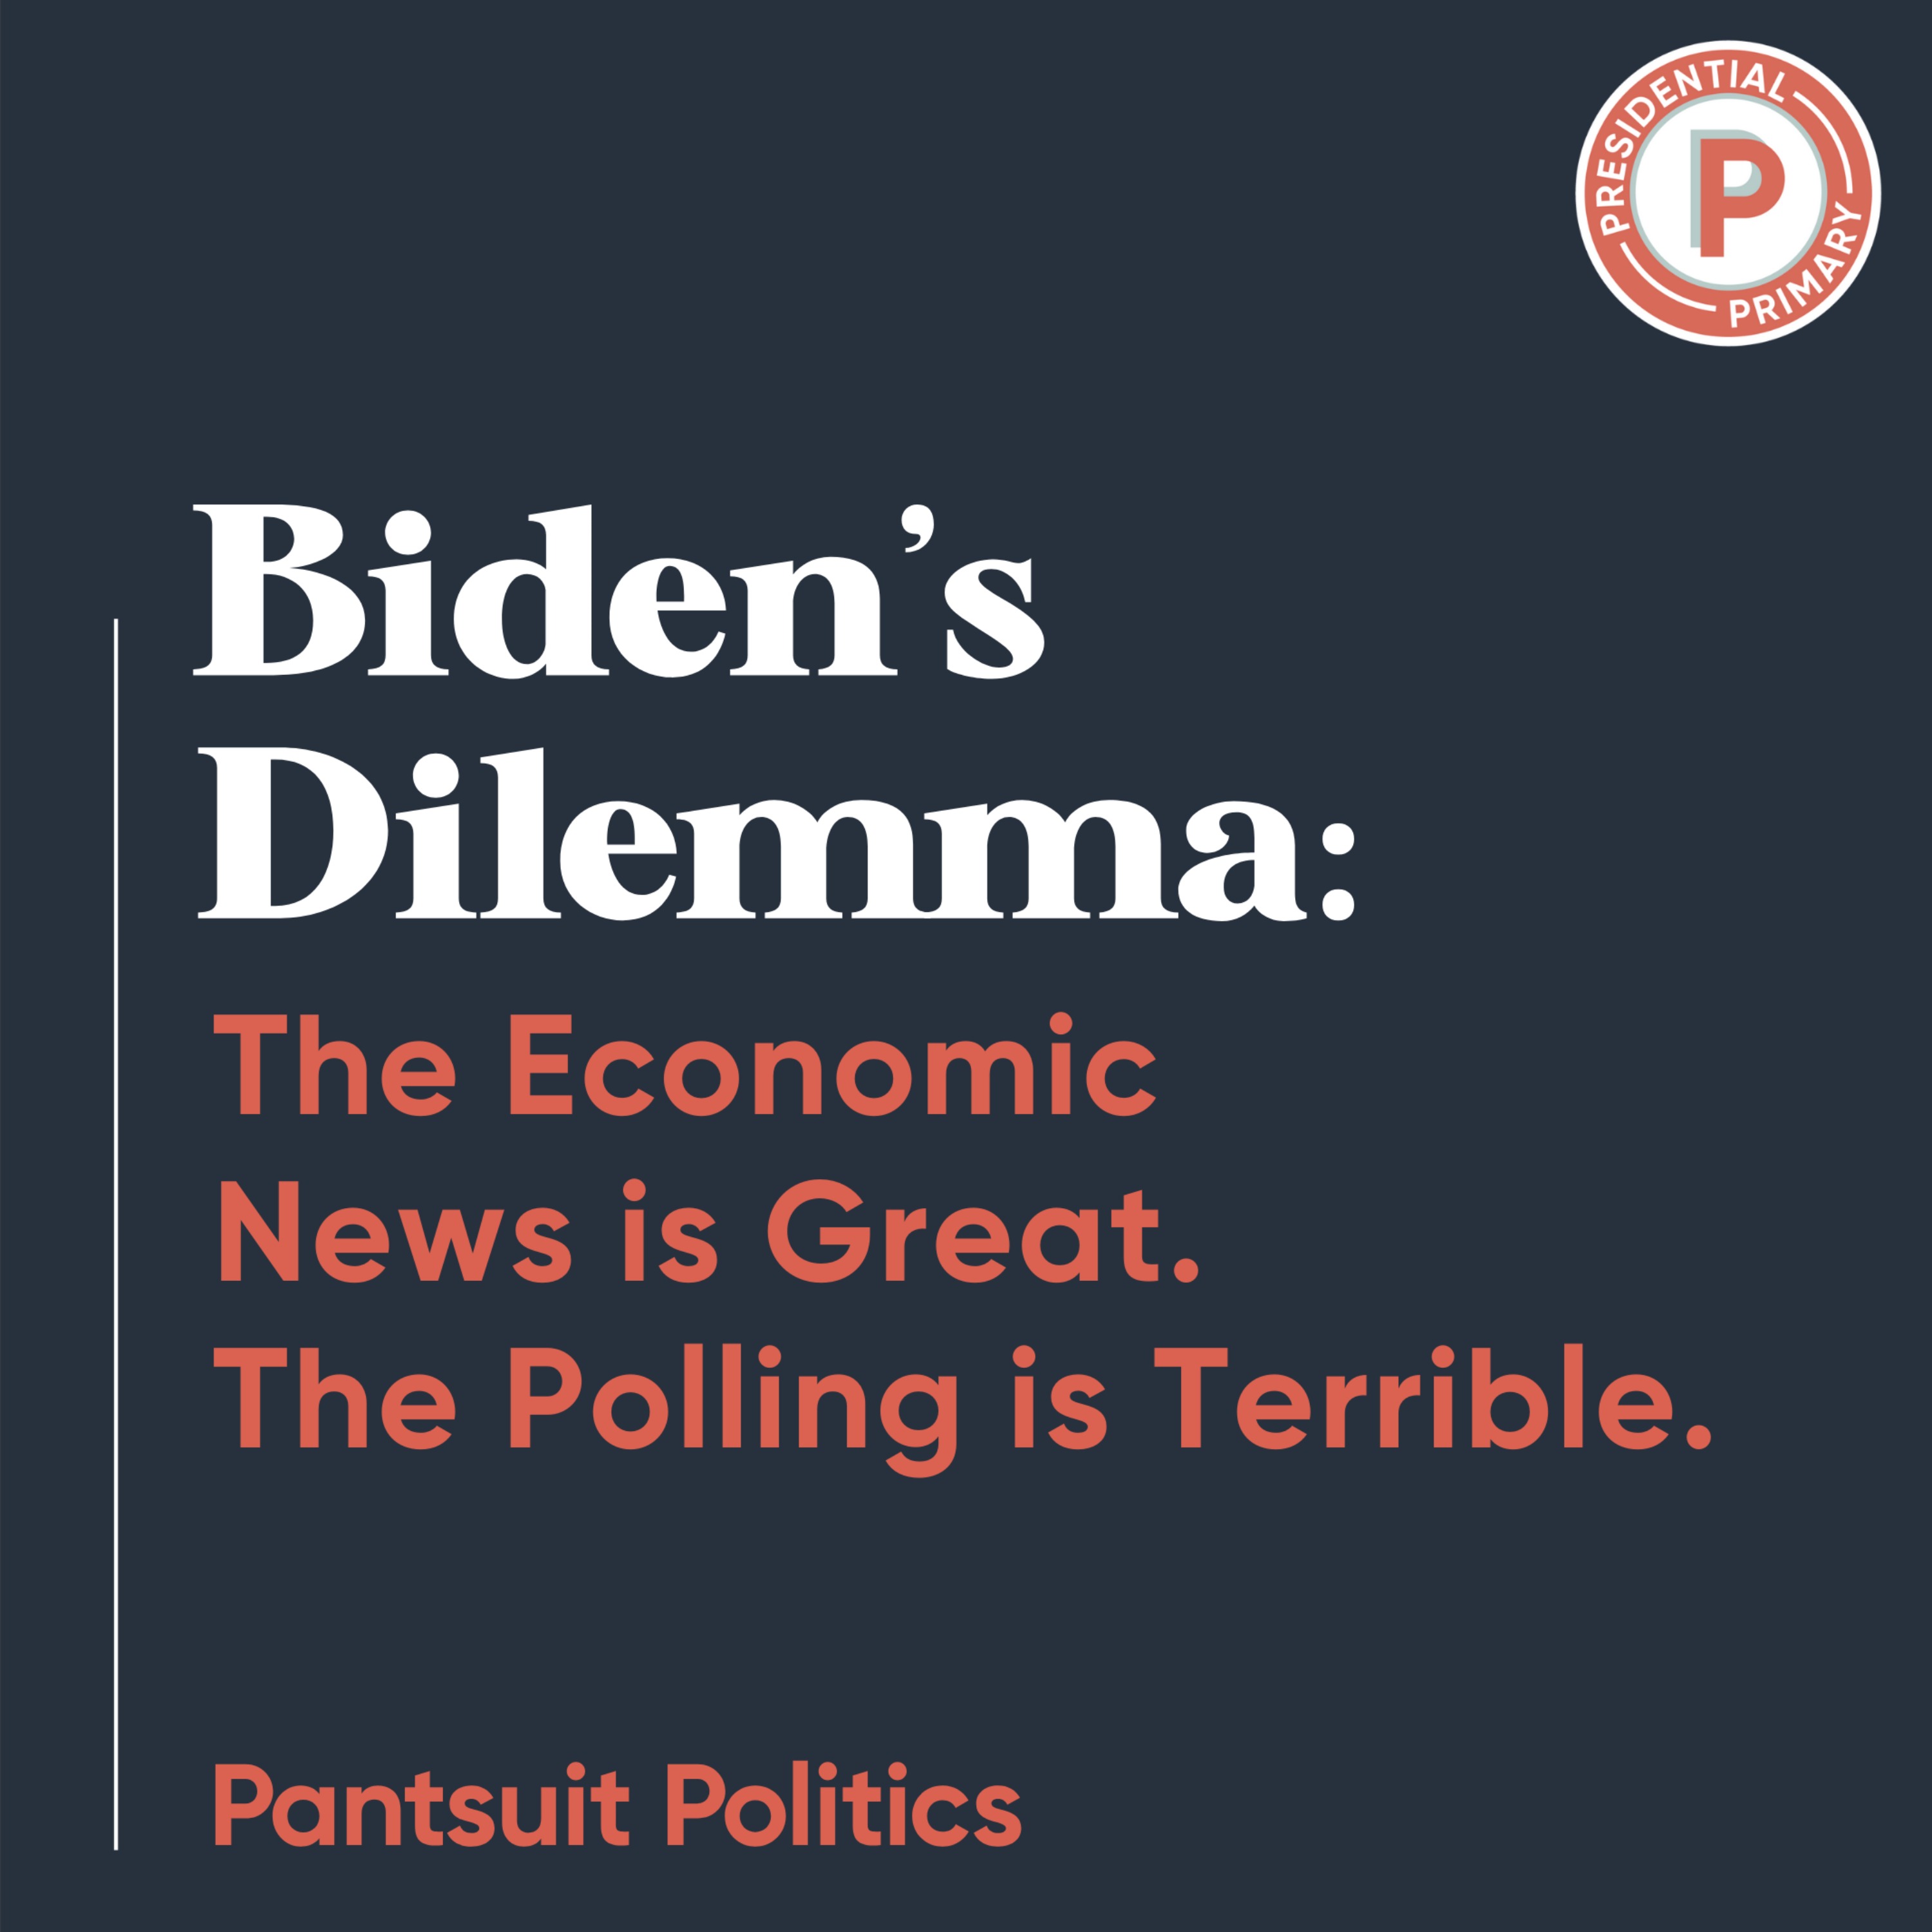 Biden’s Dilemma: The Economic News is Great. The Polling is Terrible.